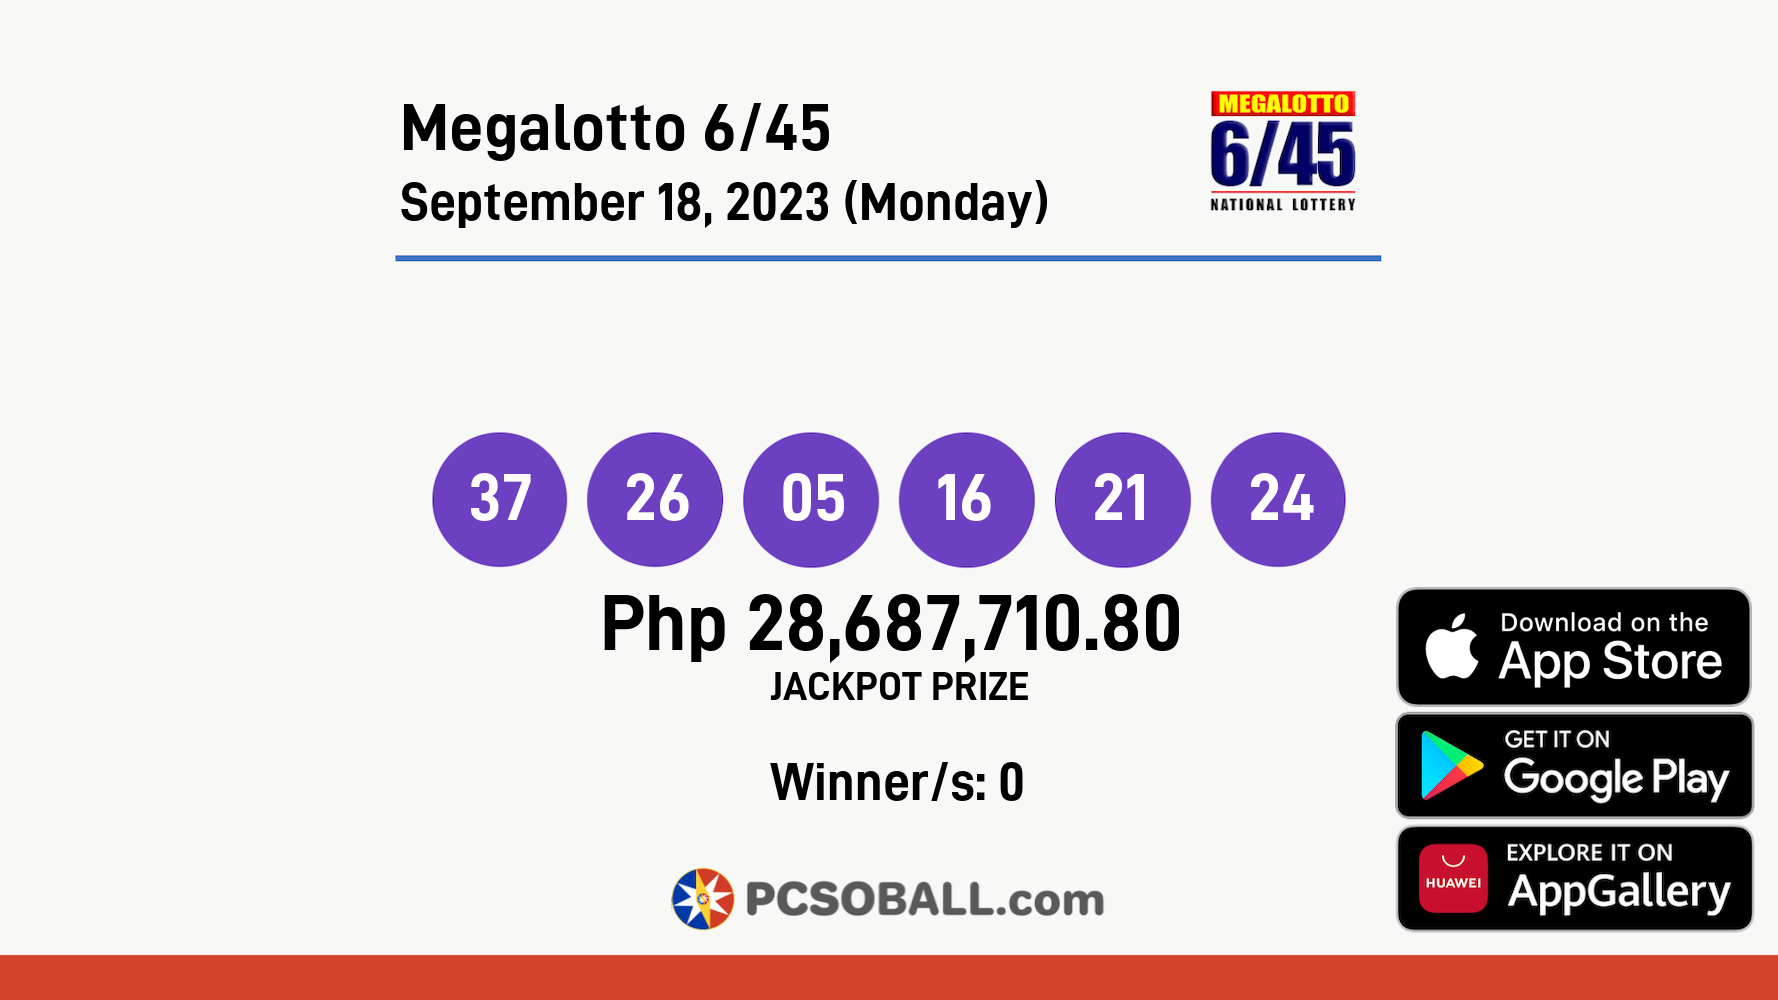 Megalotto 6/45 September 18, 2023 (Monday) Result